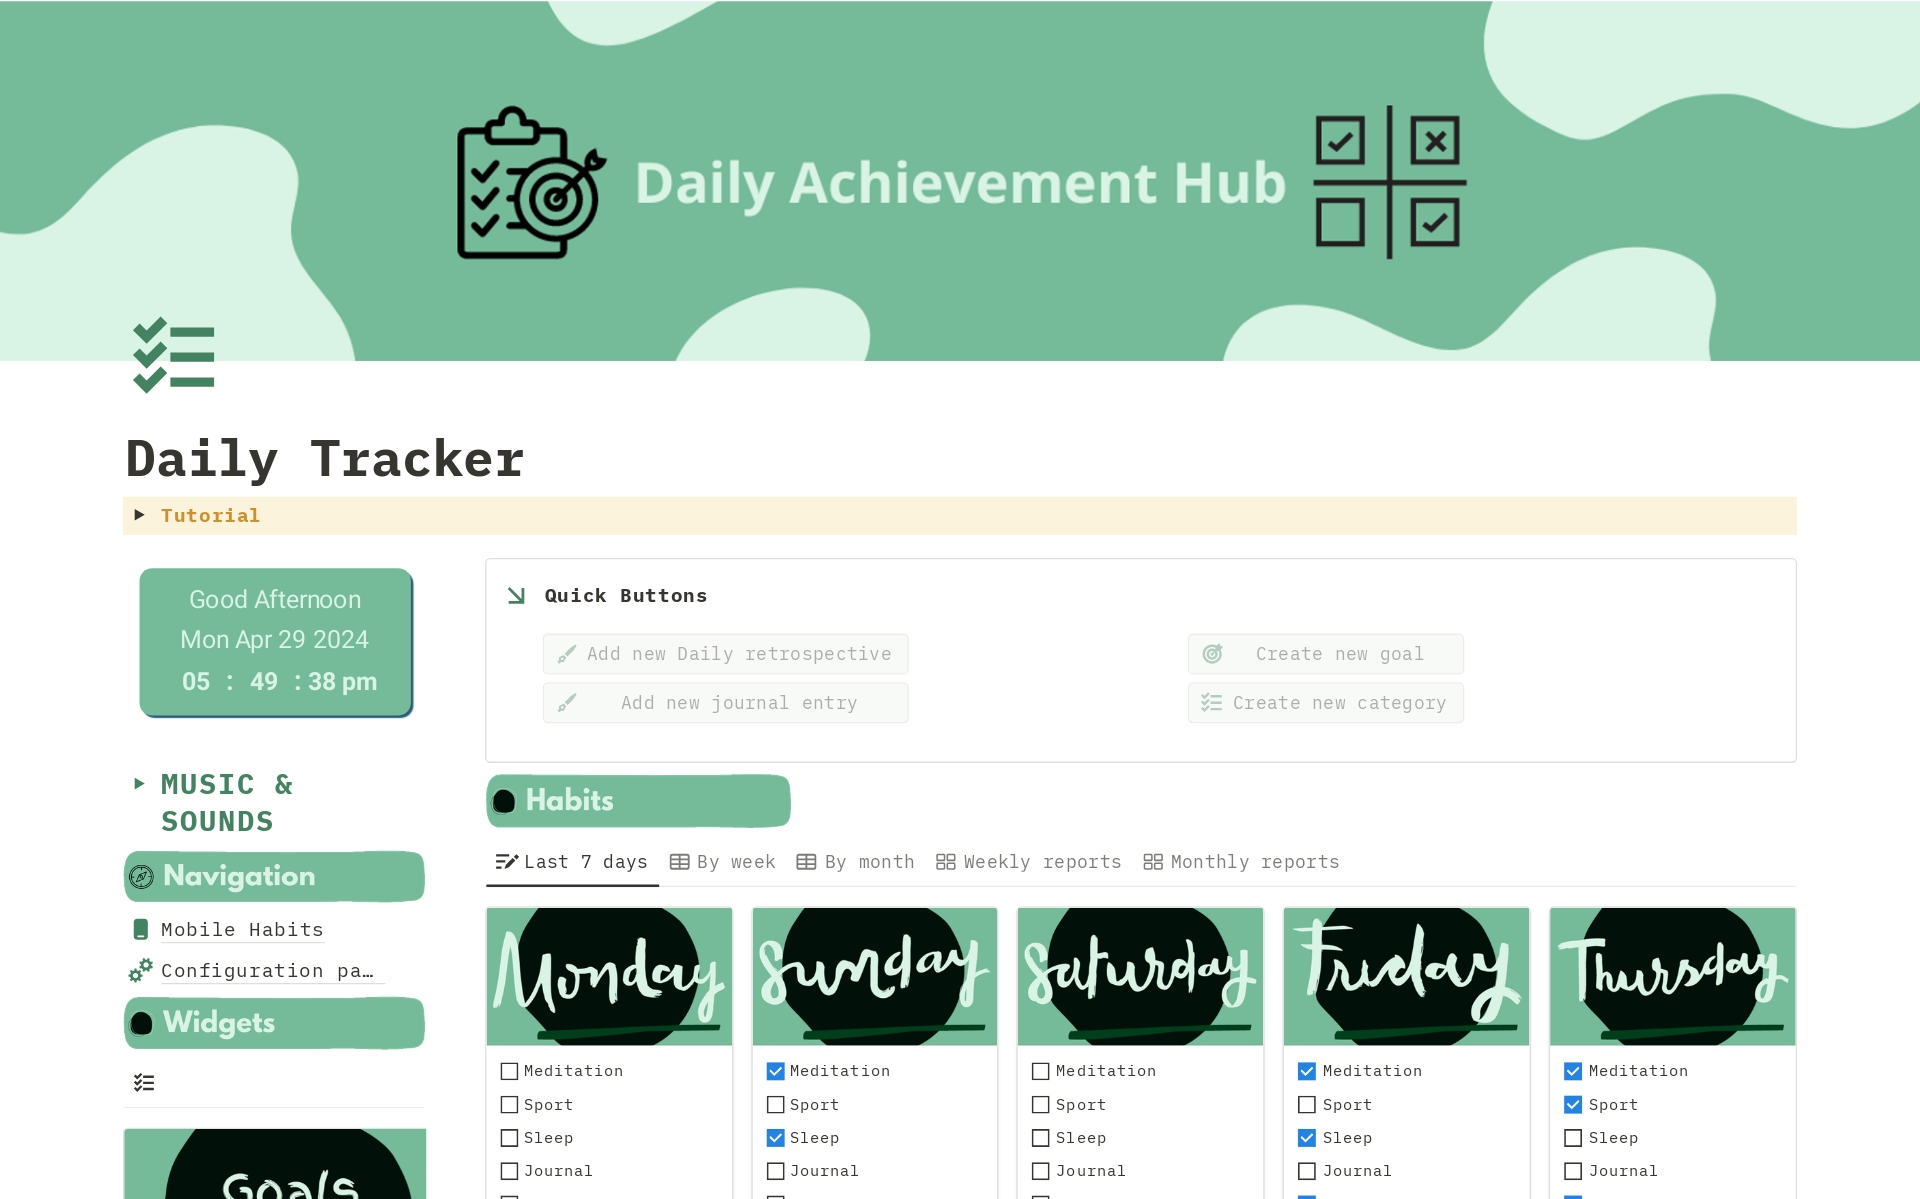 Experience Productivity Anywhere, Anytime with Daily Achievement Hub